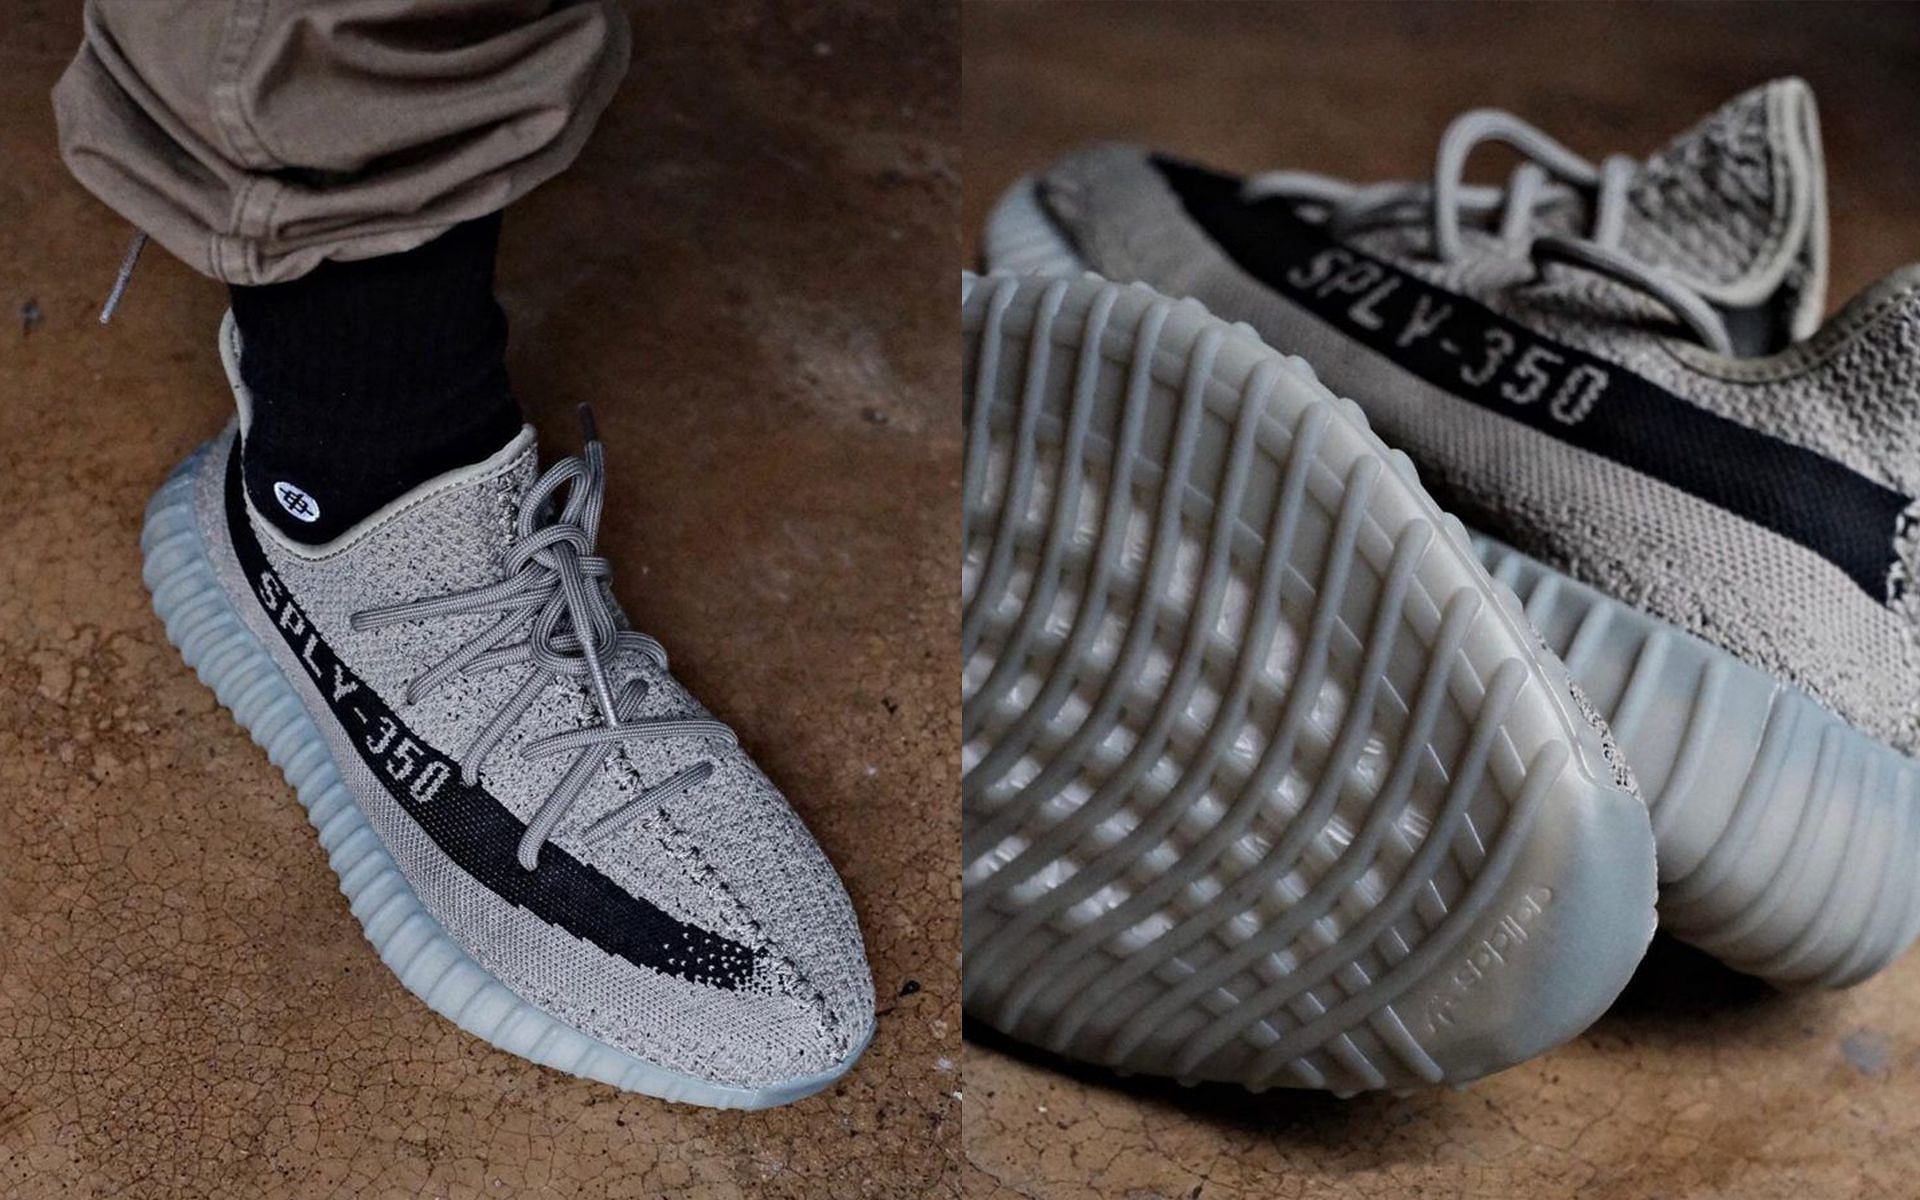 Take a closer look at the upcoming Yeezy BOOST 350 V2 Granite shoes (Image via Instagram/@sneakertigger)